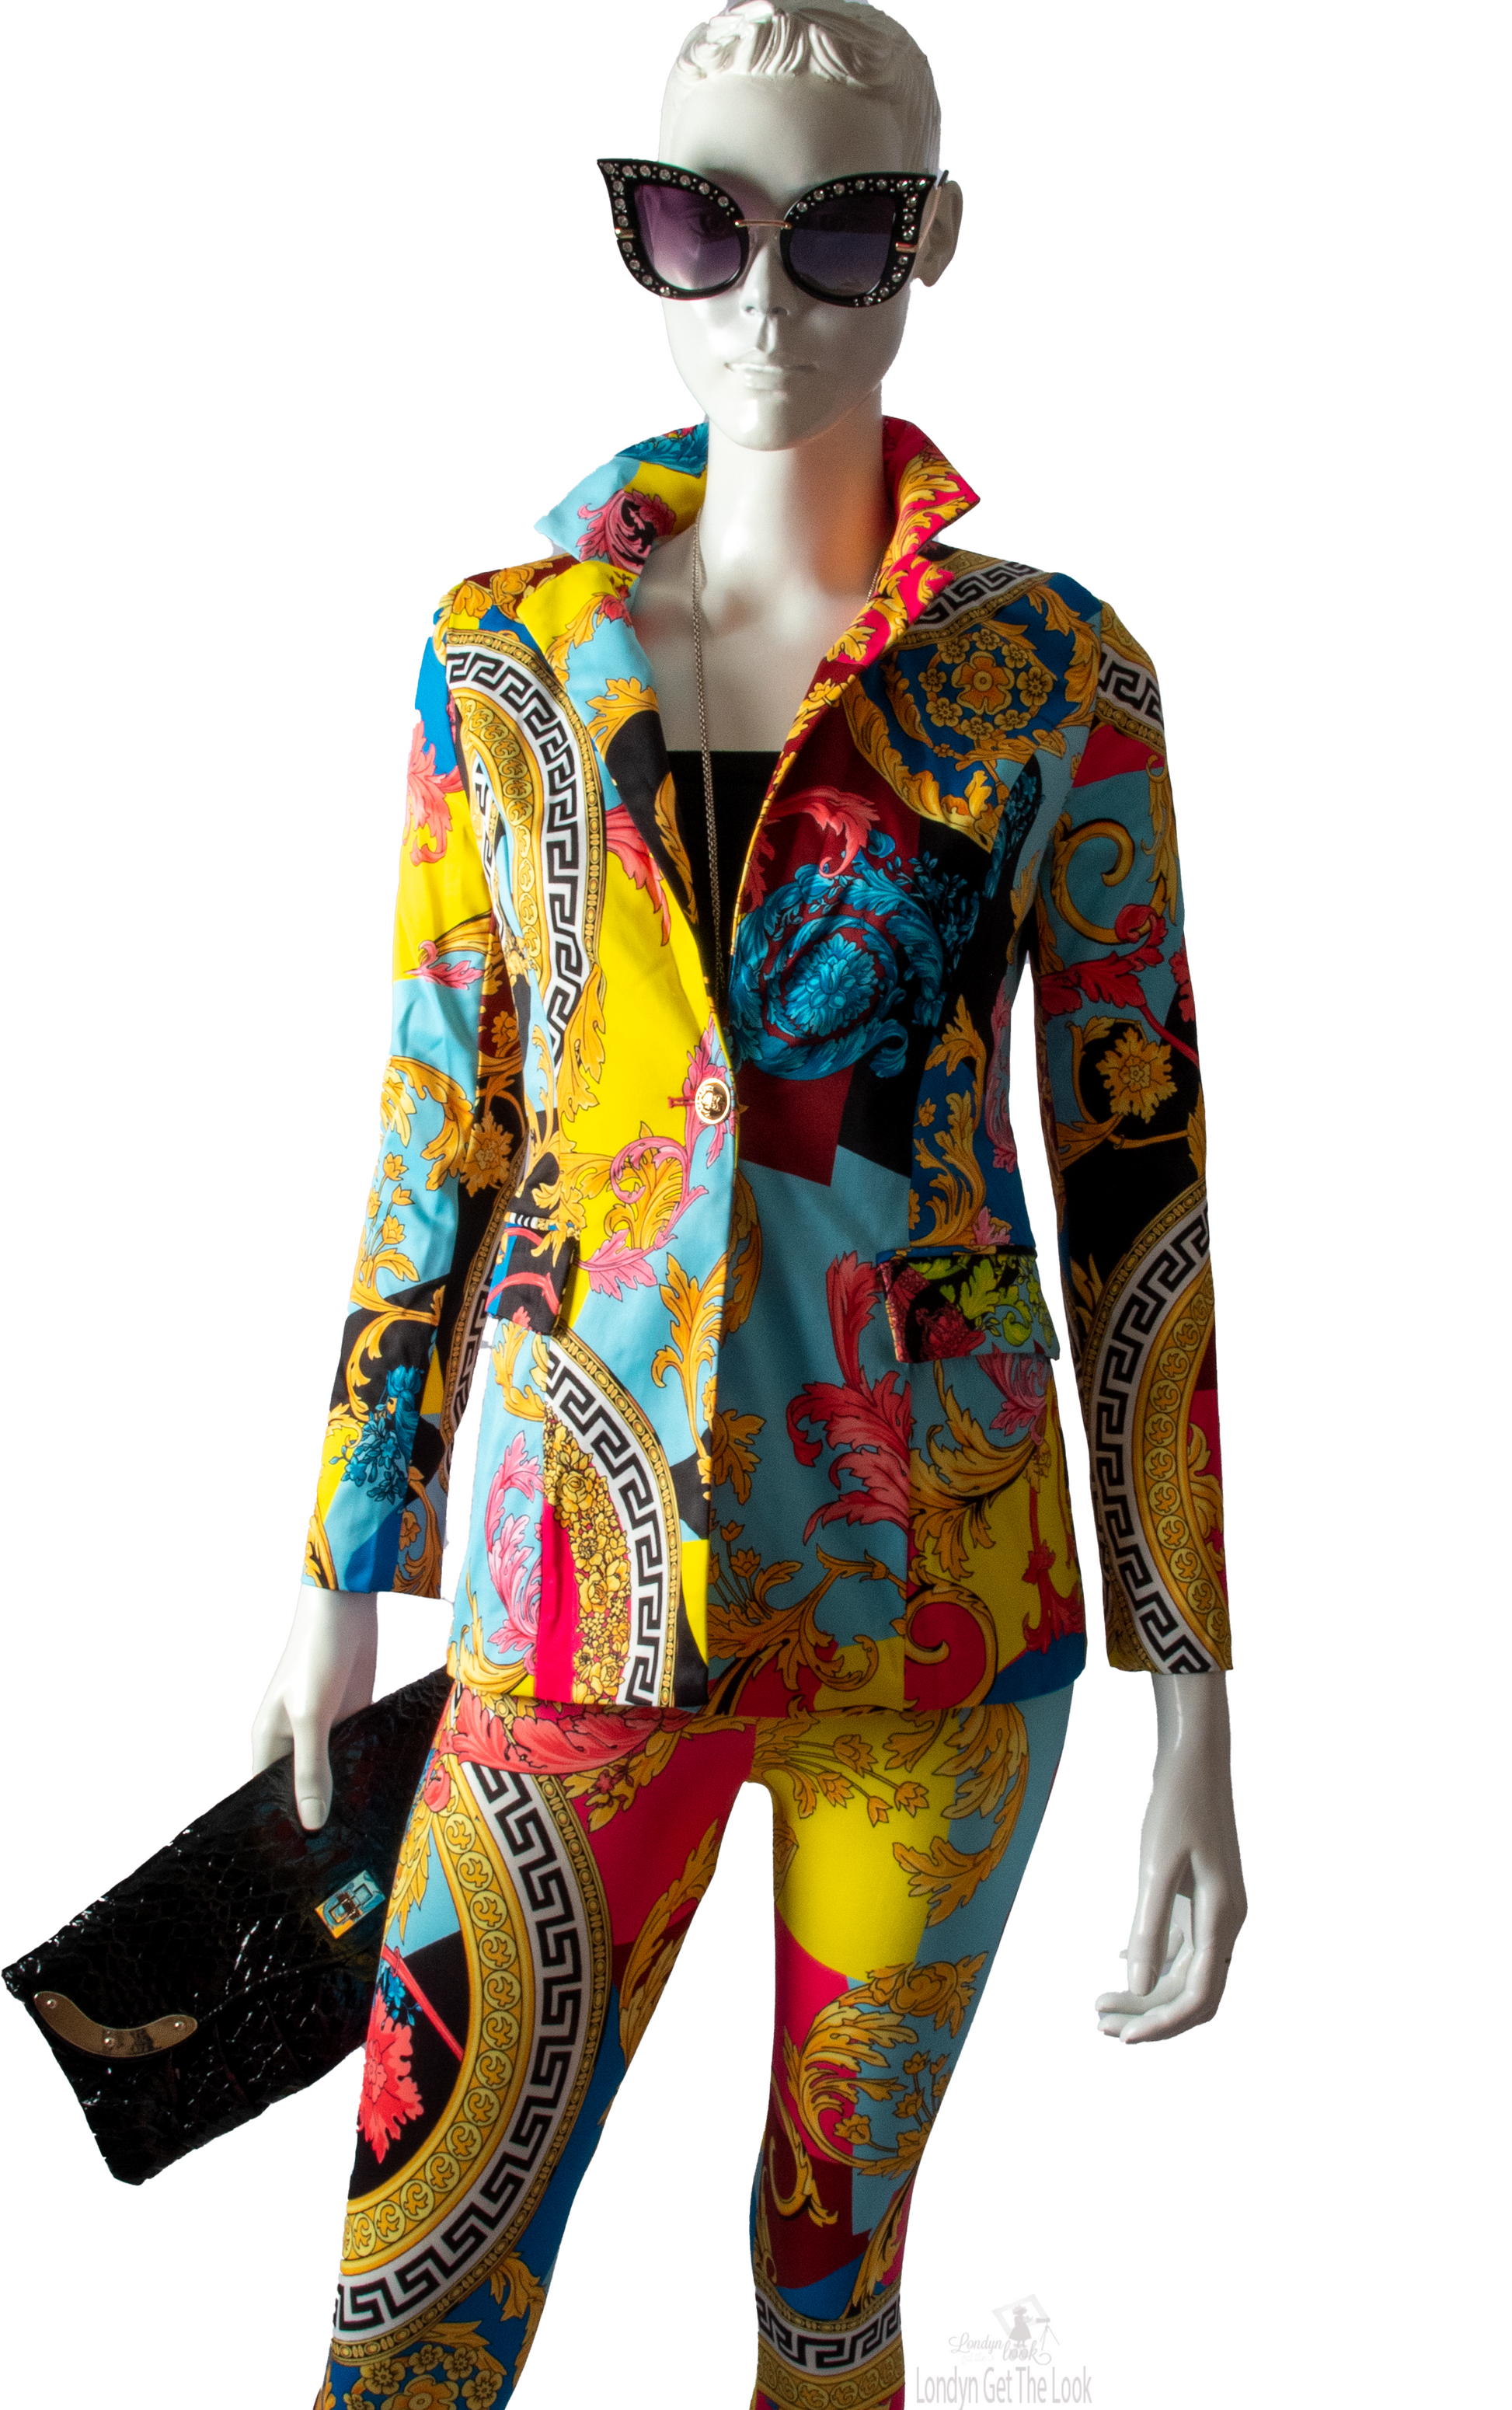 Two Piece Set-Blue Multi Long Sleeve Print Jacket With Collar, Two Side Pockets  Matches With Skinny Fitted Print Pants